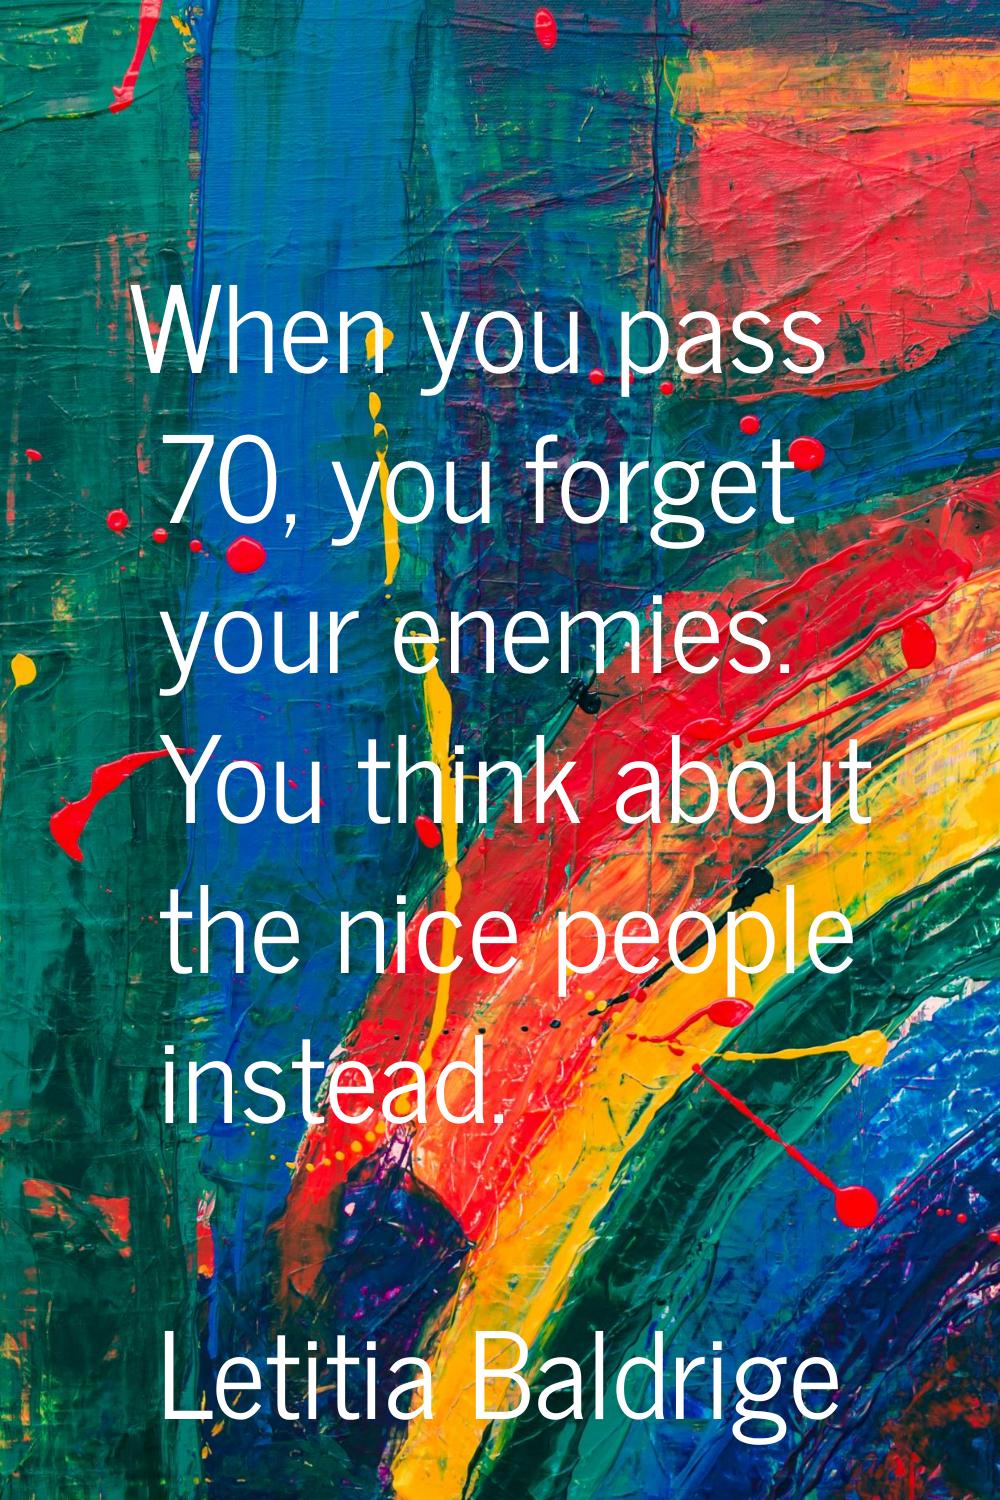 When you pass 70, you forget your enemies. You think about the nice people instead.